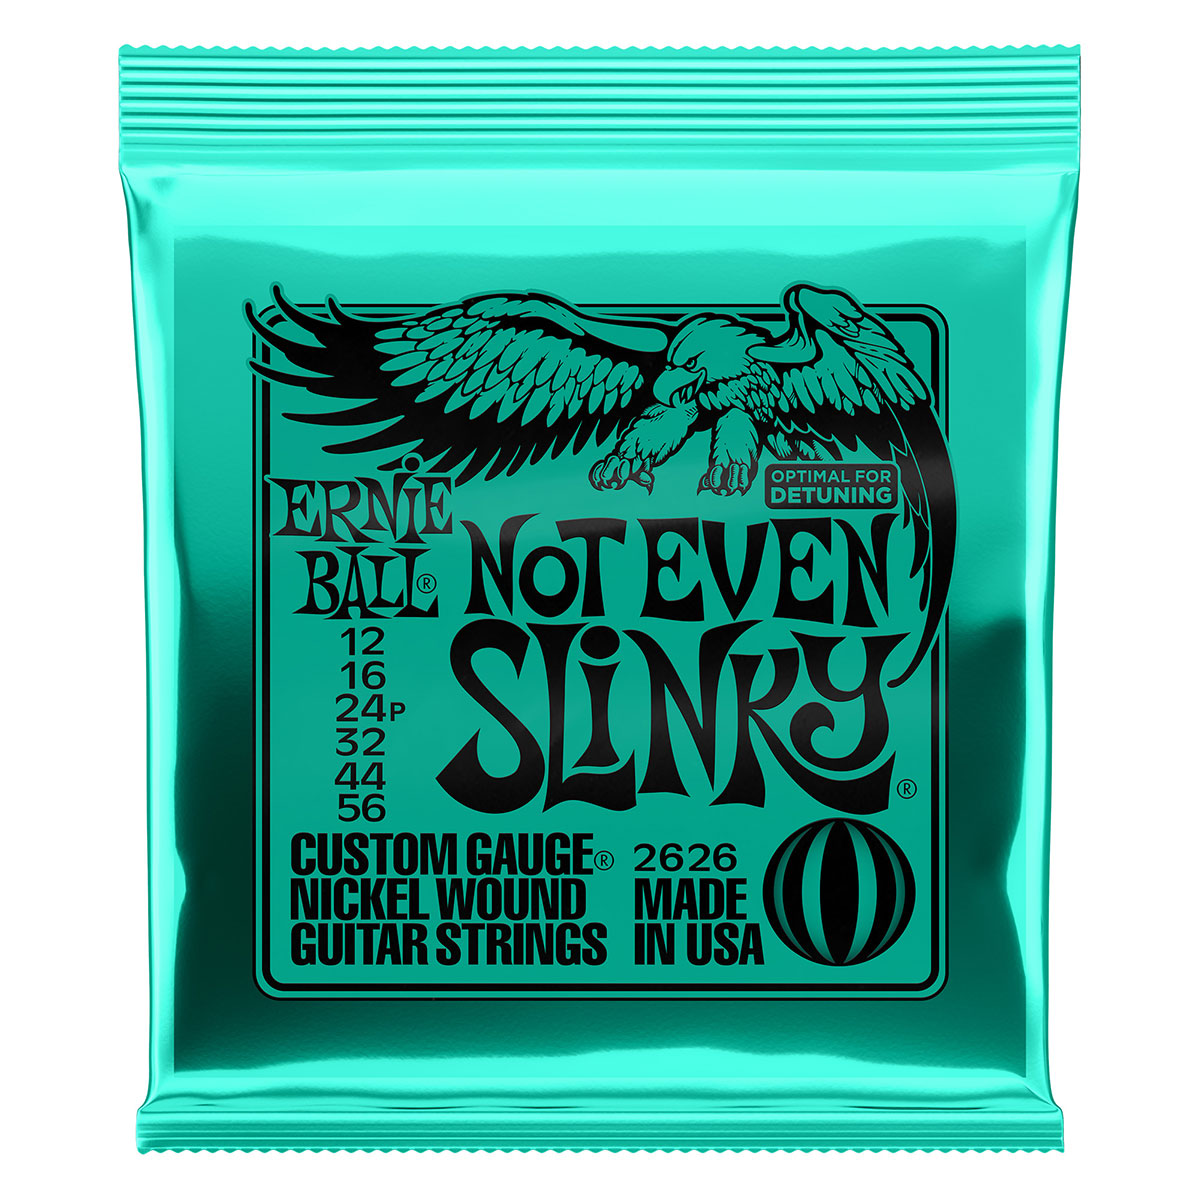 An image of Ernie Ball 2626 Not Even Slinky 12-56 - Gift for a Guitarist